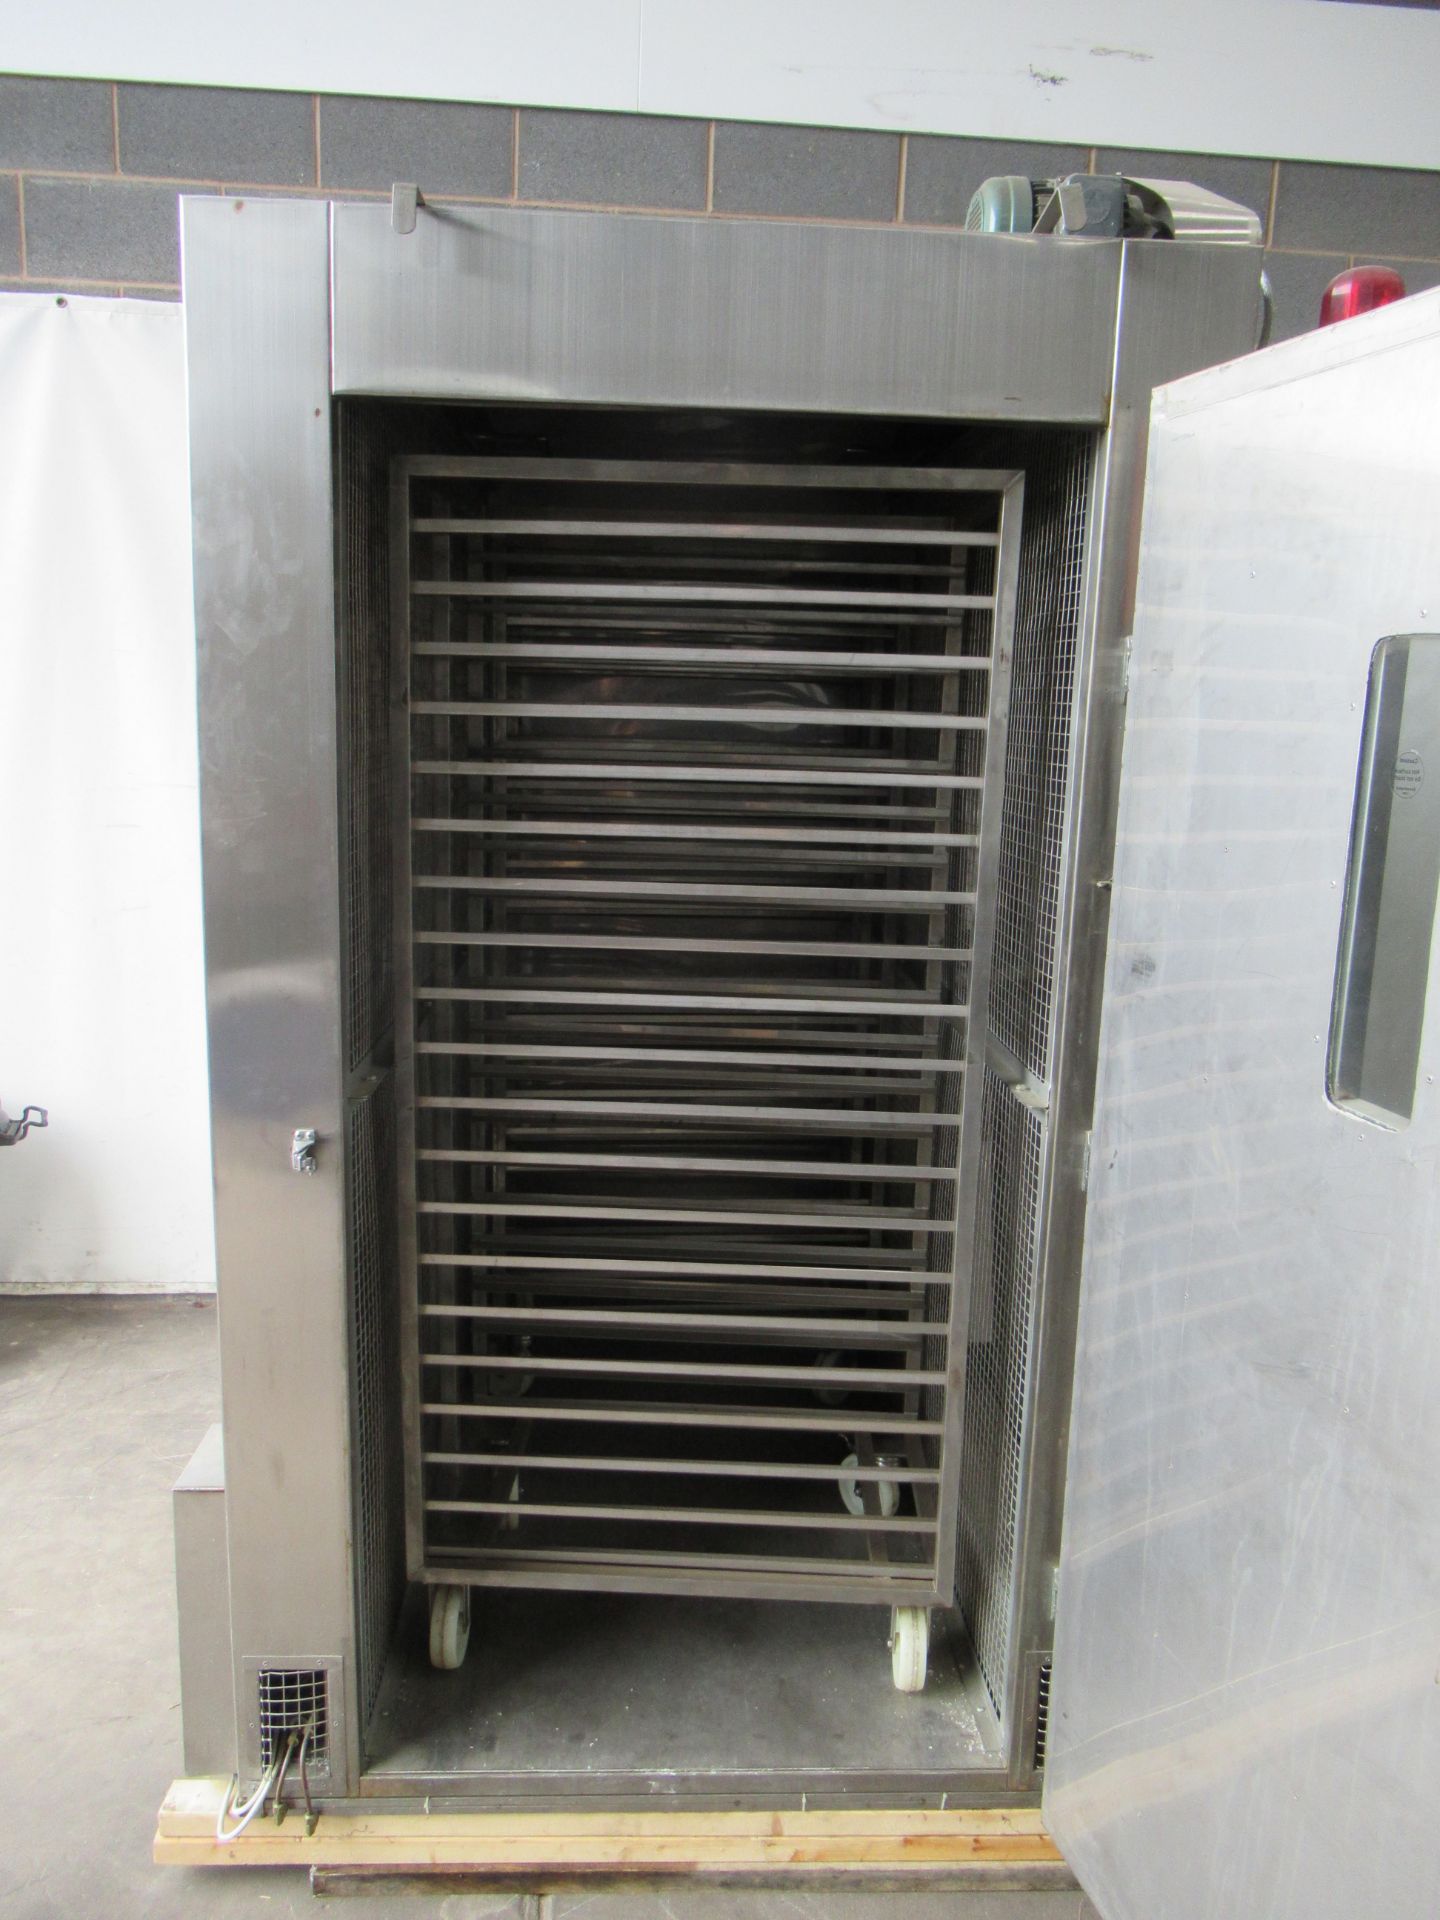 Tsung Hsing 'box type dryer' commercial oven/dryer with two trollies, 415V, 50Hz - Image 7 of 7